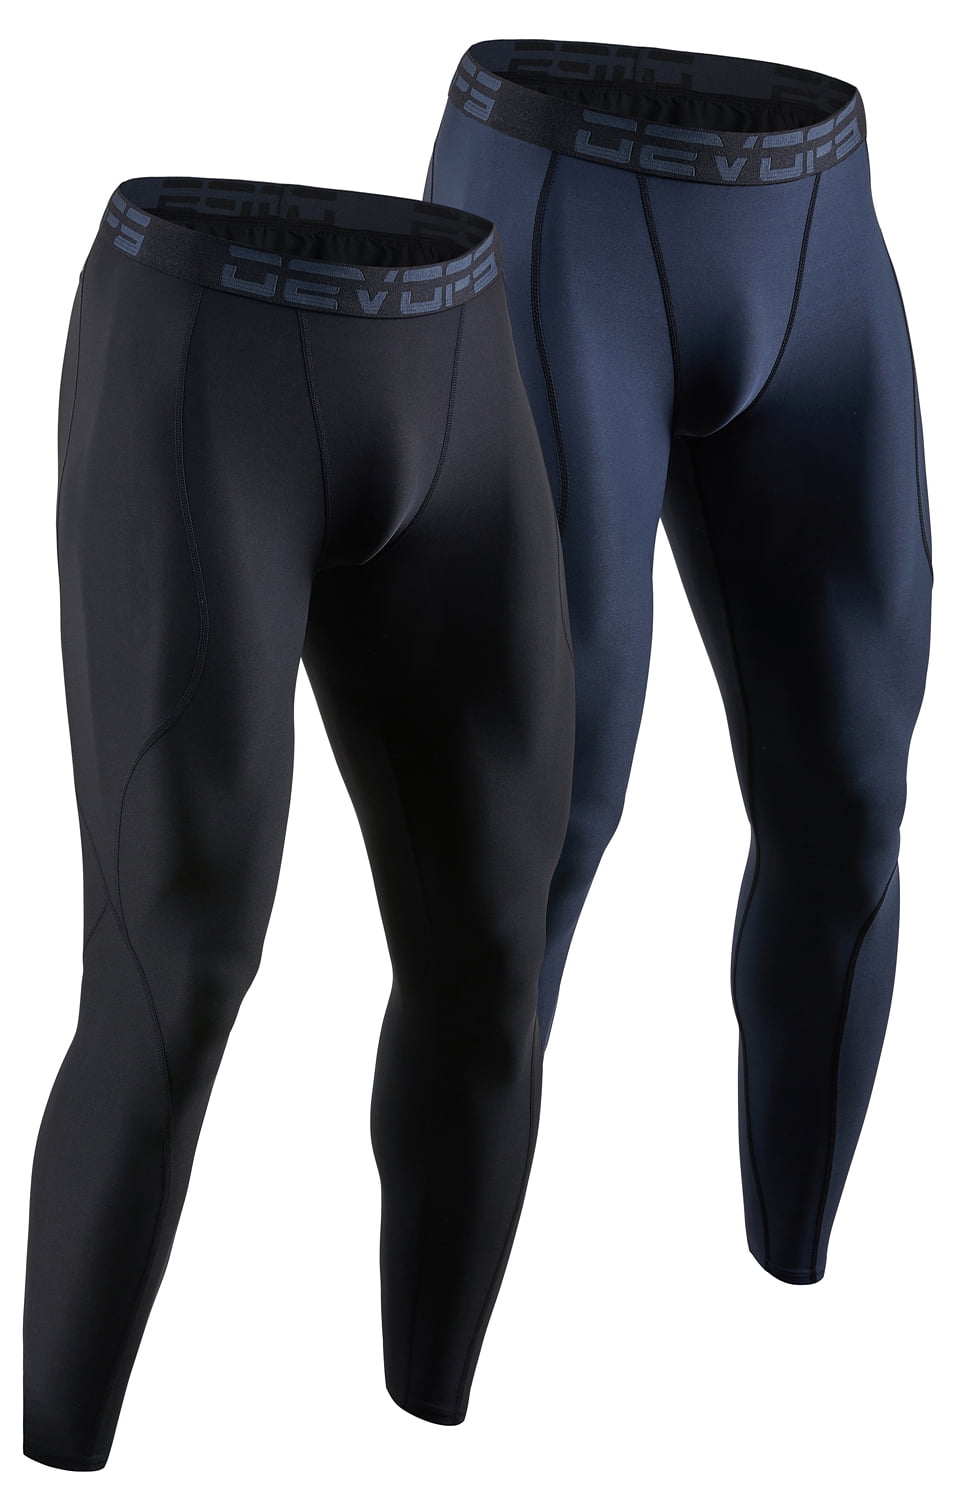 Men's Compression Leggings Pants Trousers Running Fitness